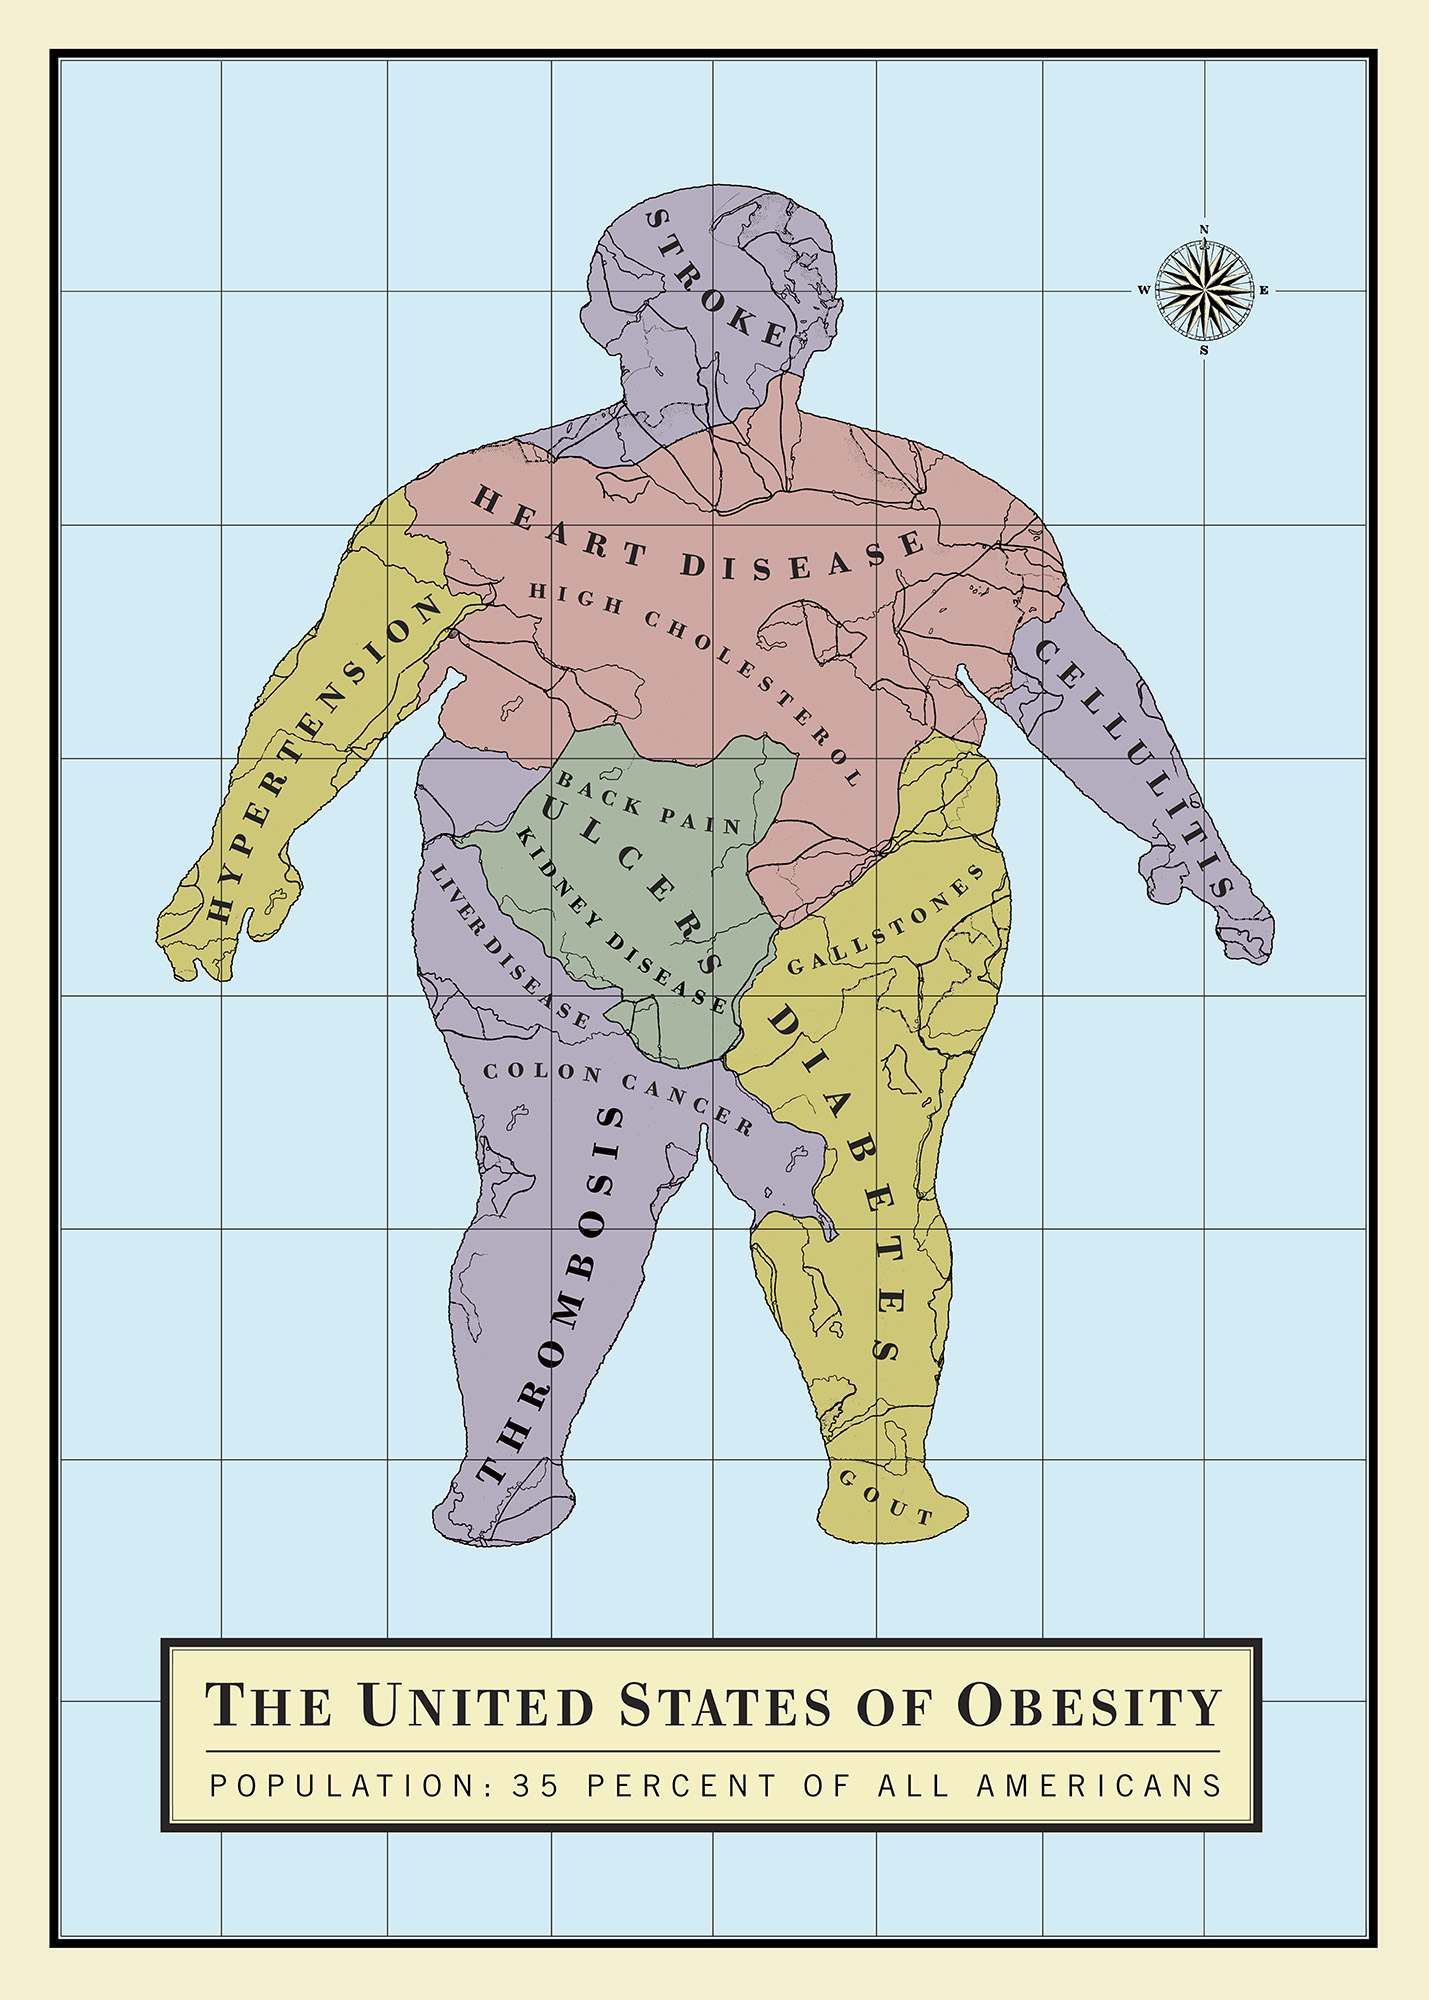 The United States of Obesity